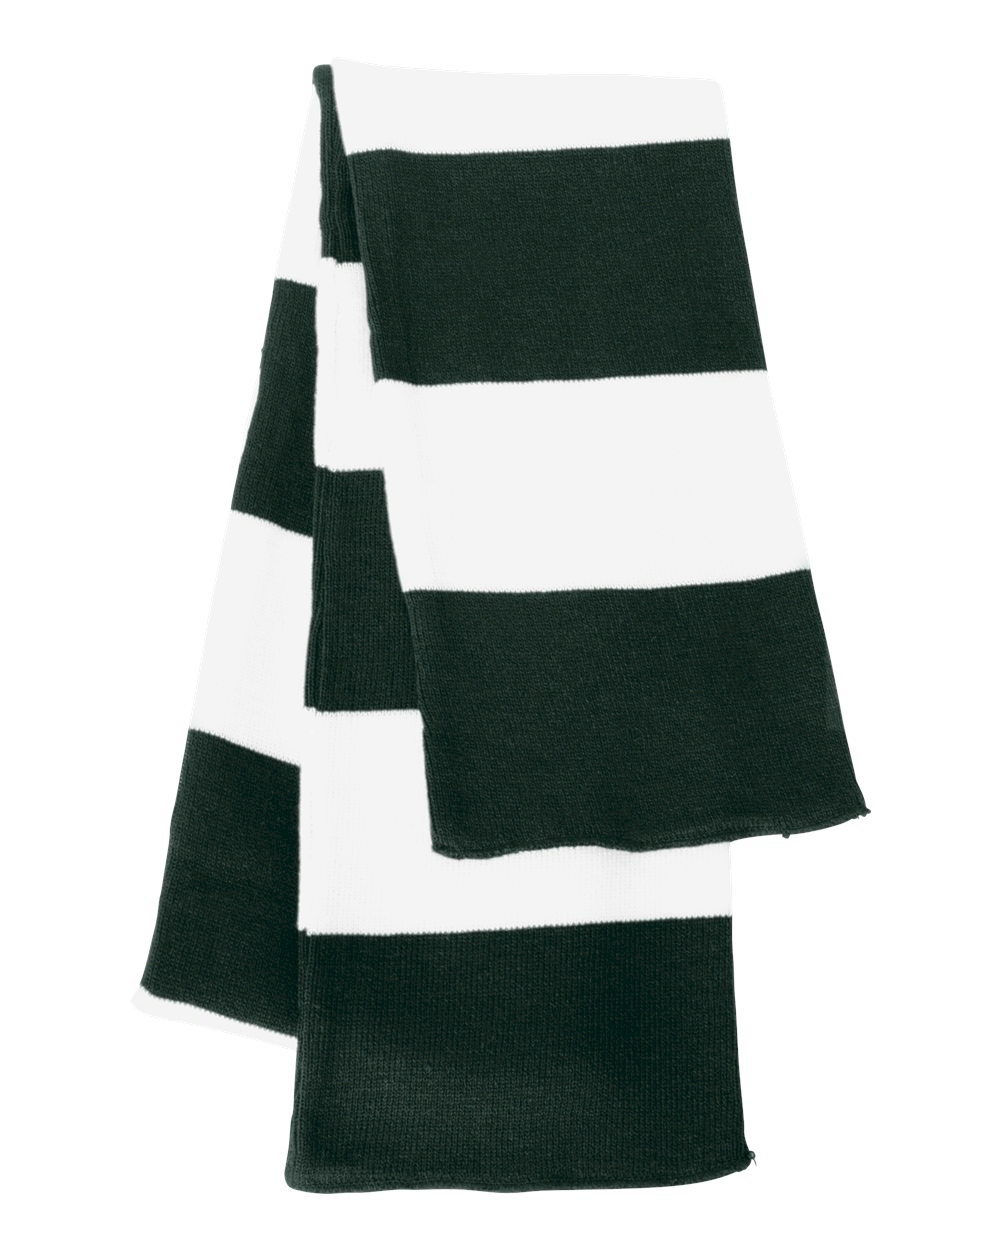 Rugby Striped Knit Scarf Embroidery Blanks - FOREST/WHITE